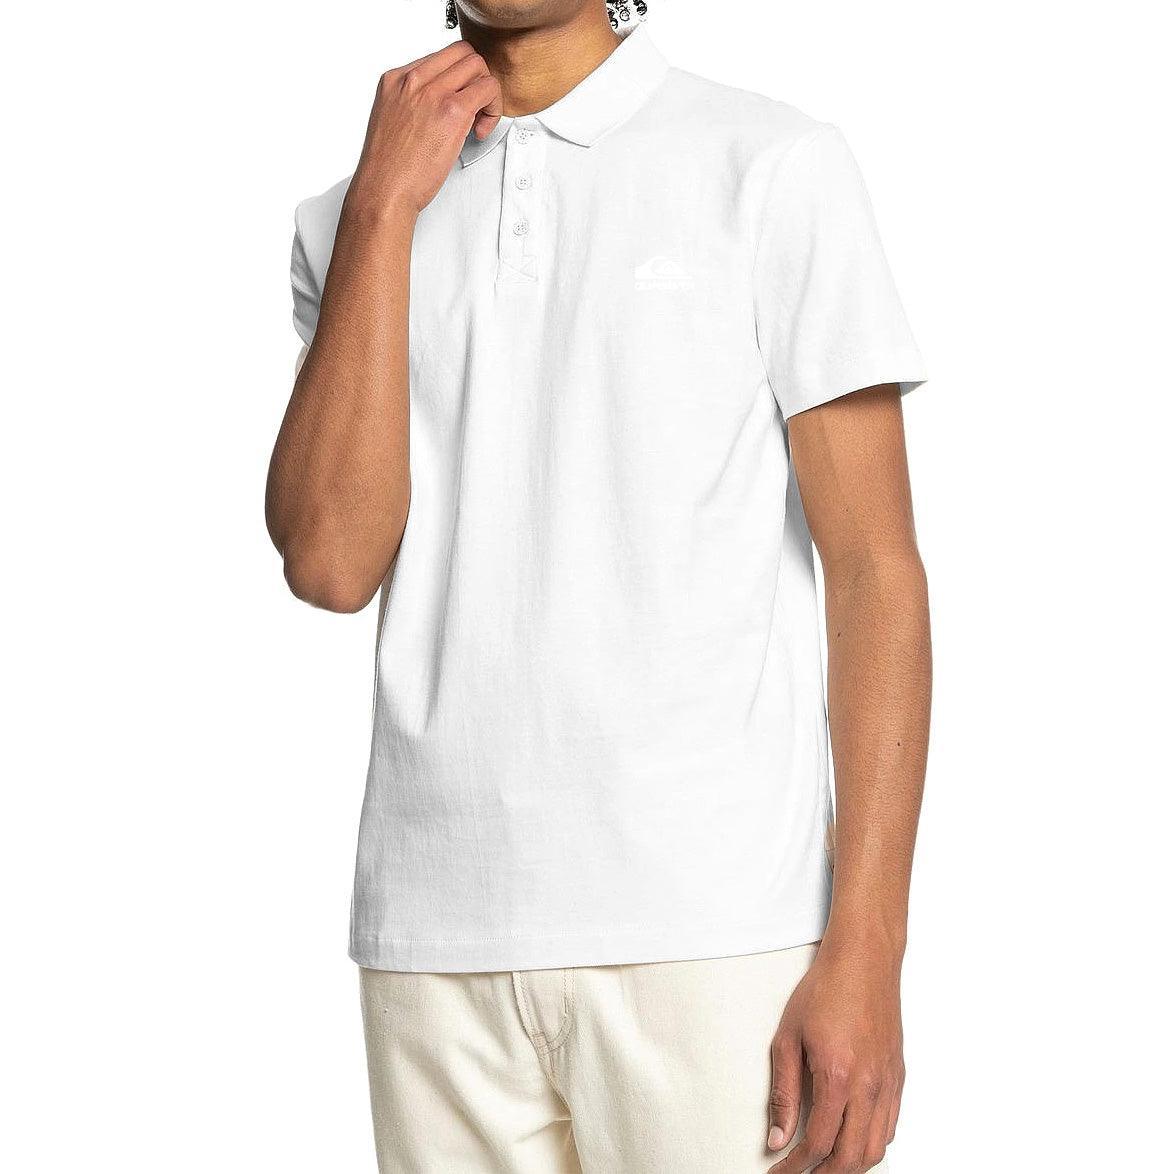 Chomba Quiksilver Essentials Blanco - Indy